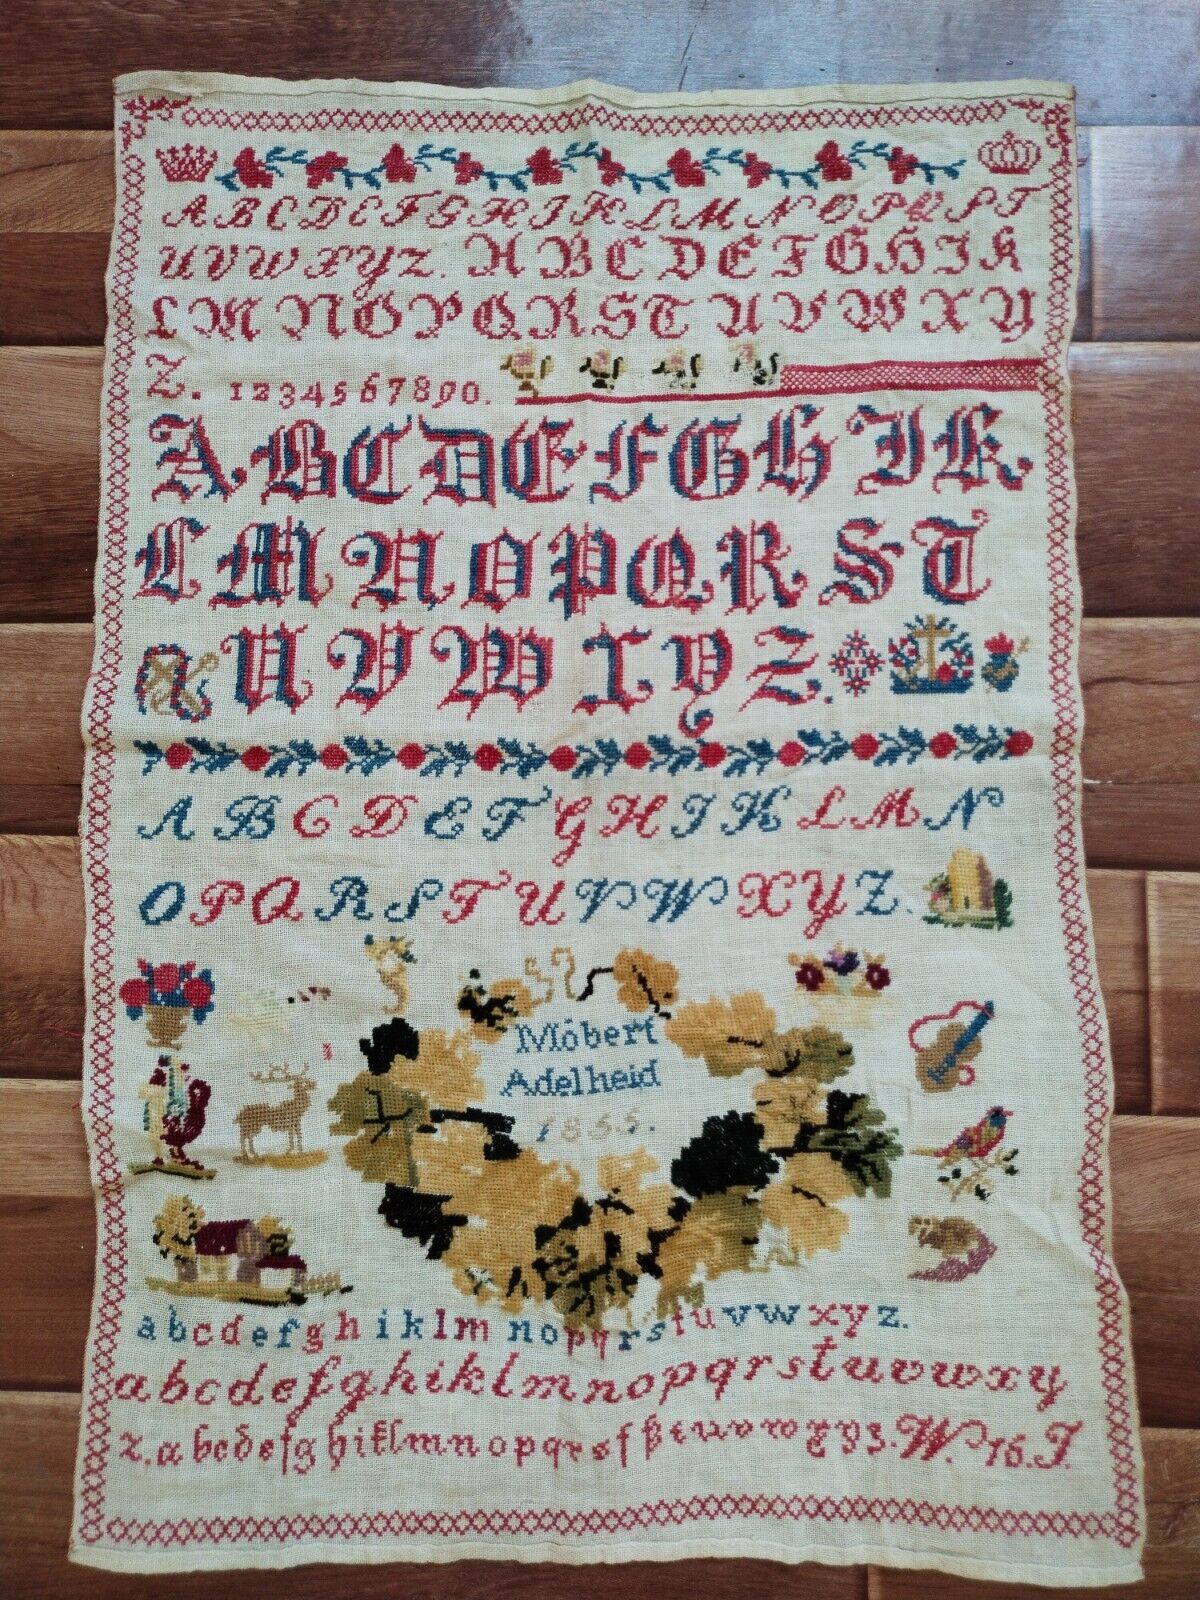 antique gorgeous alphabets embroidery sampler needlework dated 1855 item676